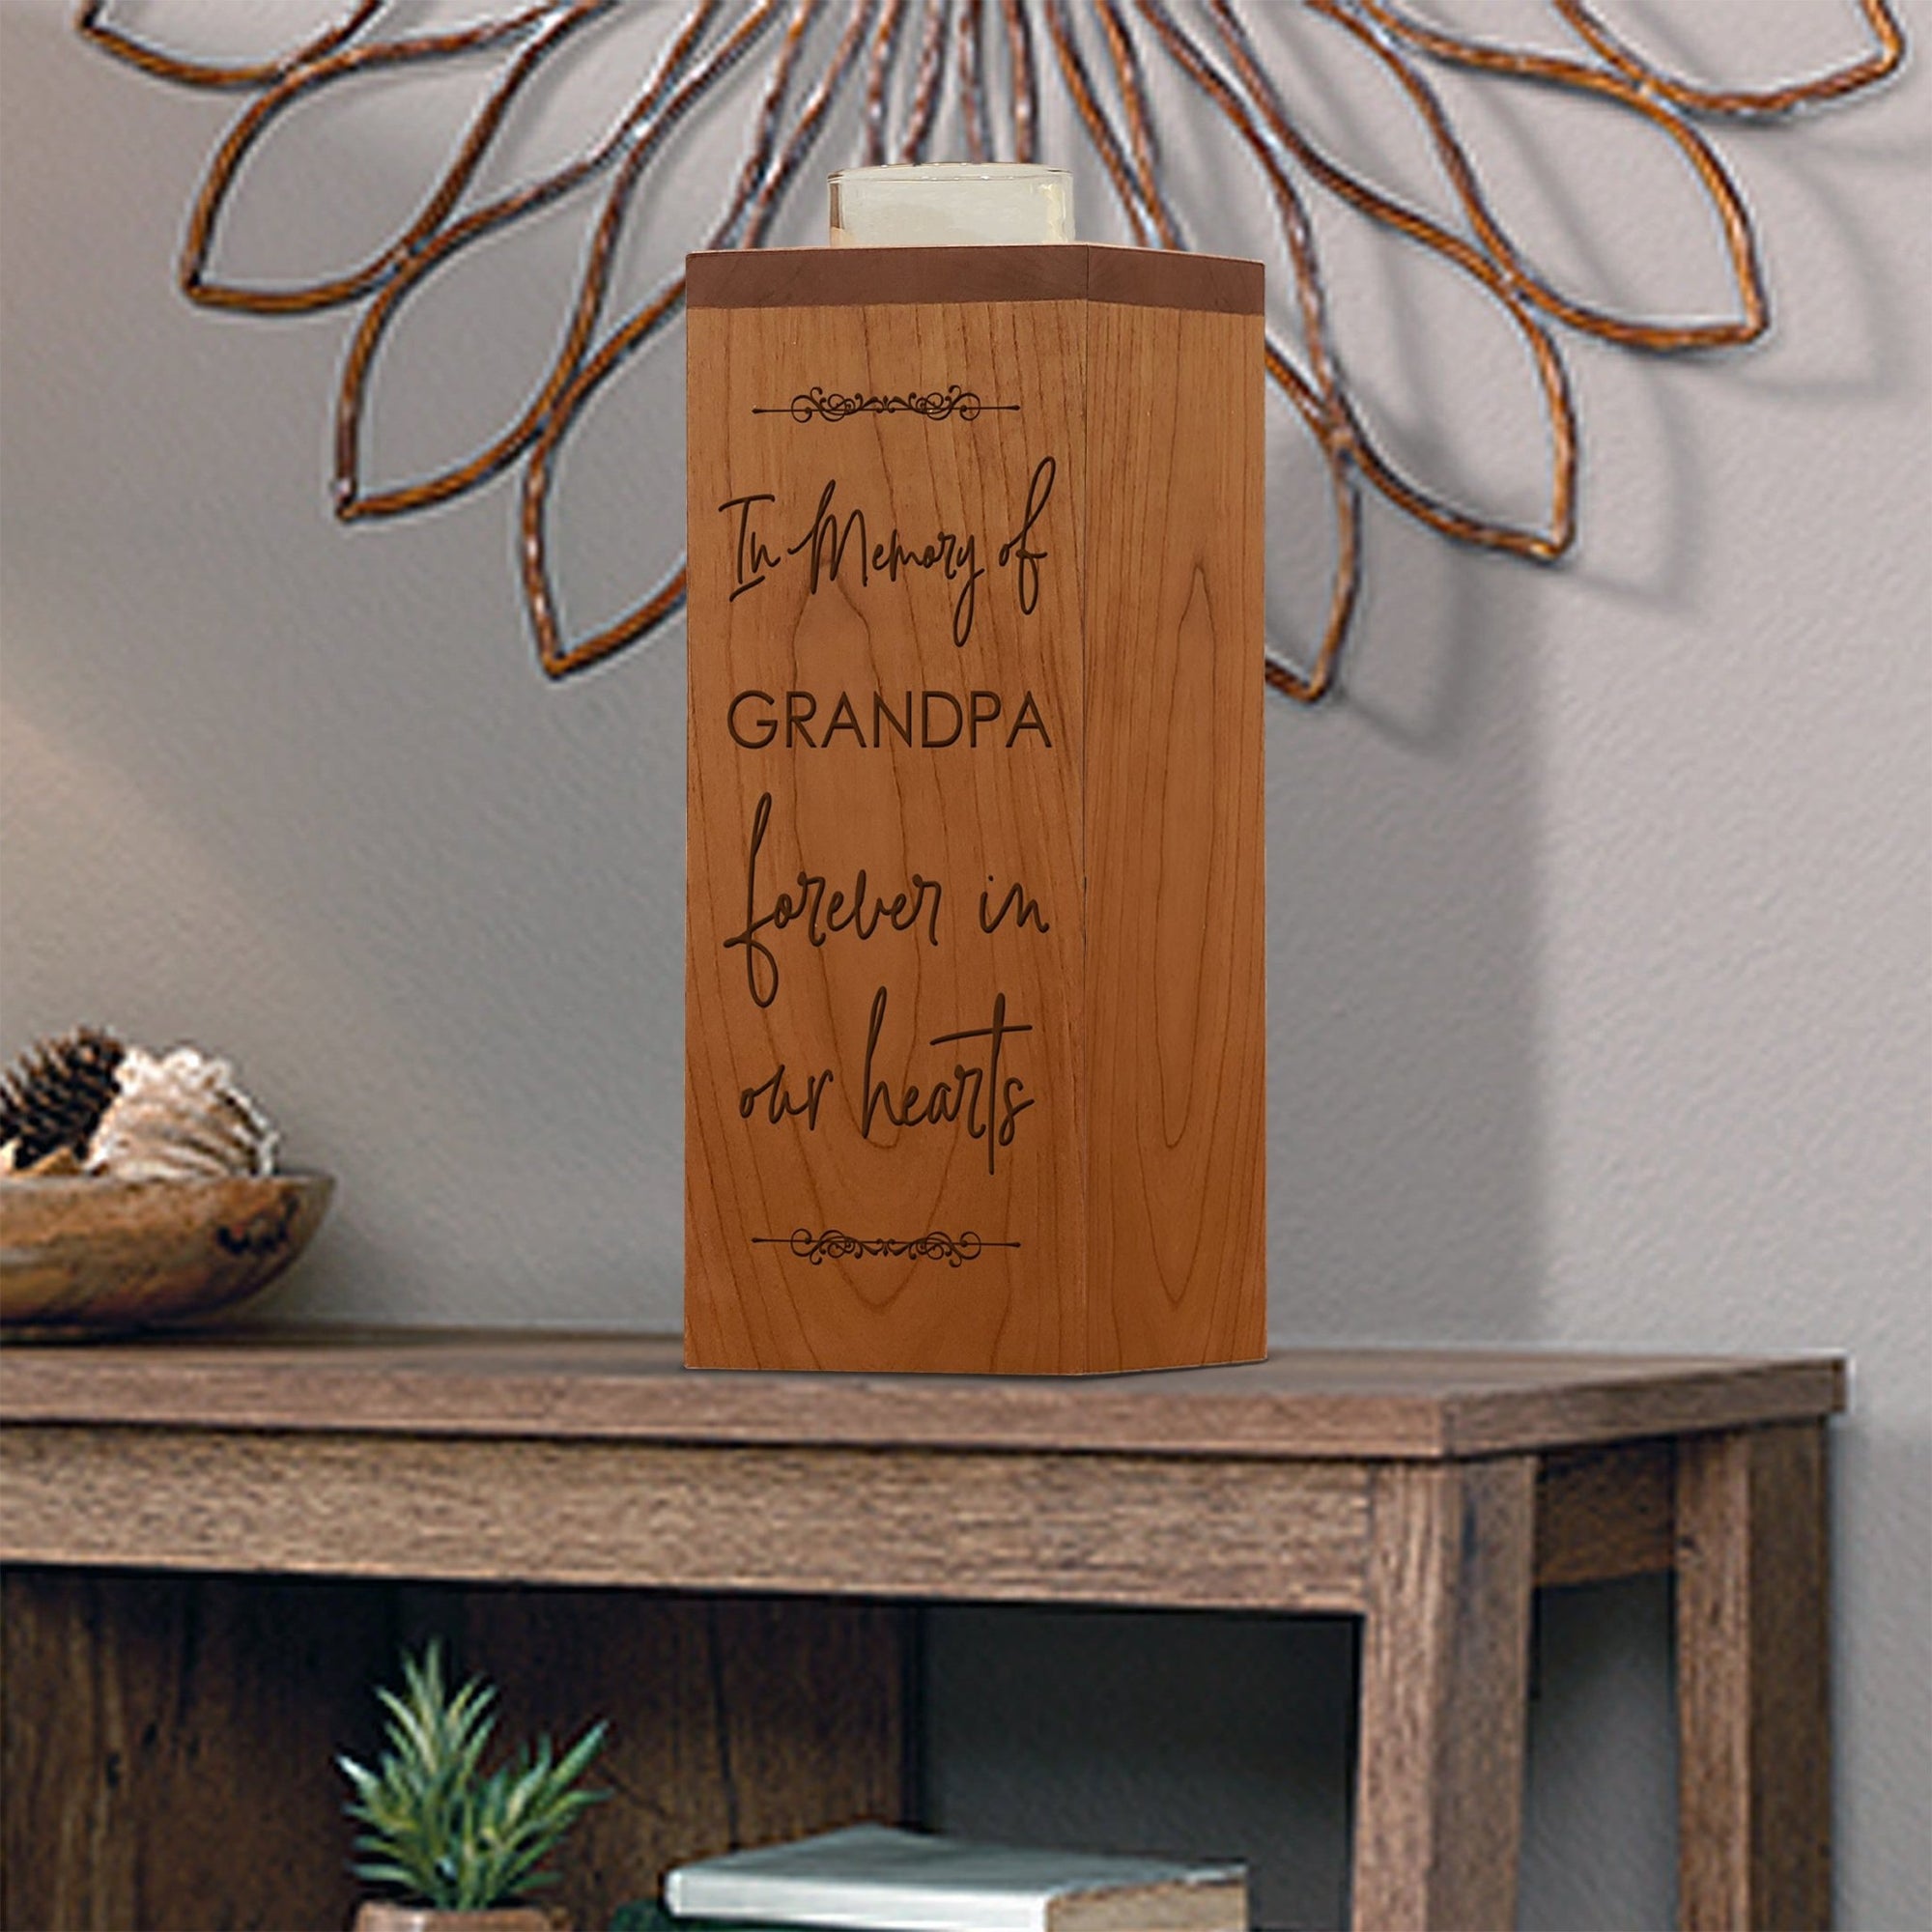 Cozy Cardinal Memorial Vertical Urns With Single Candle Holder For Human Ashes - In Memory Of Grandpa - LifeSong Milestones